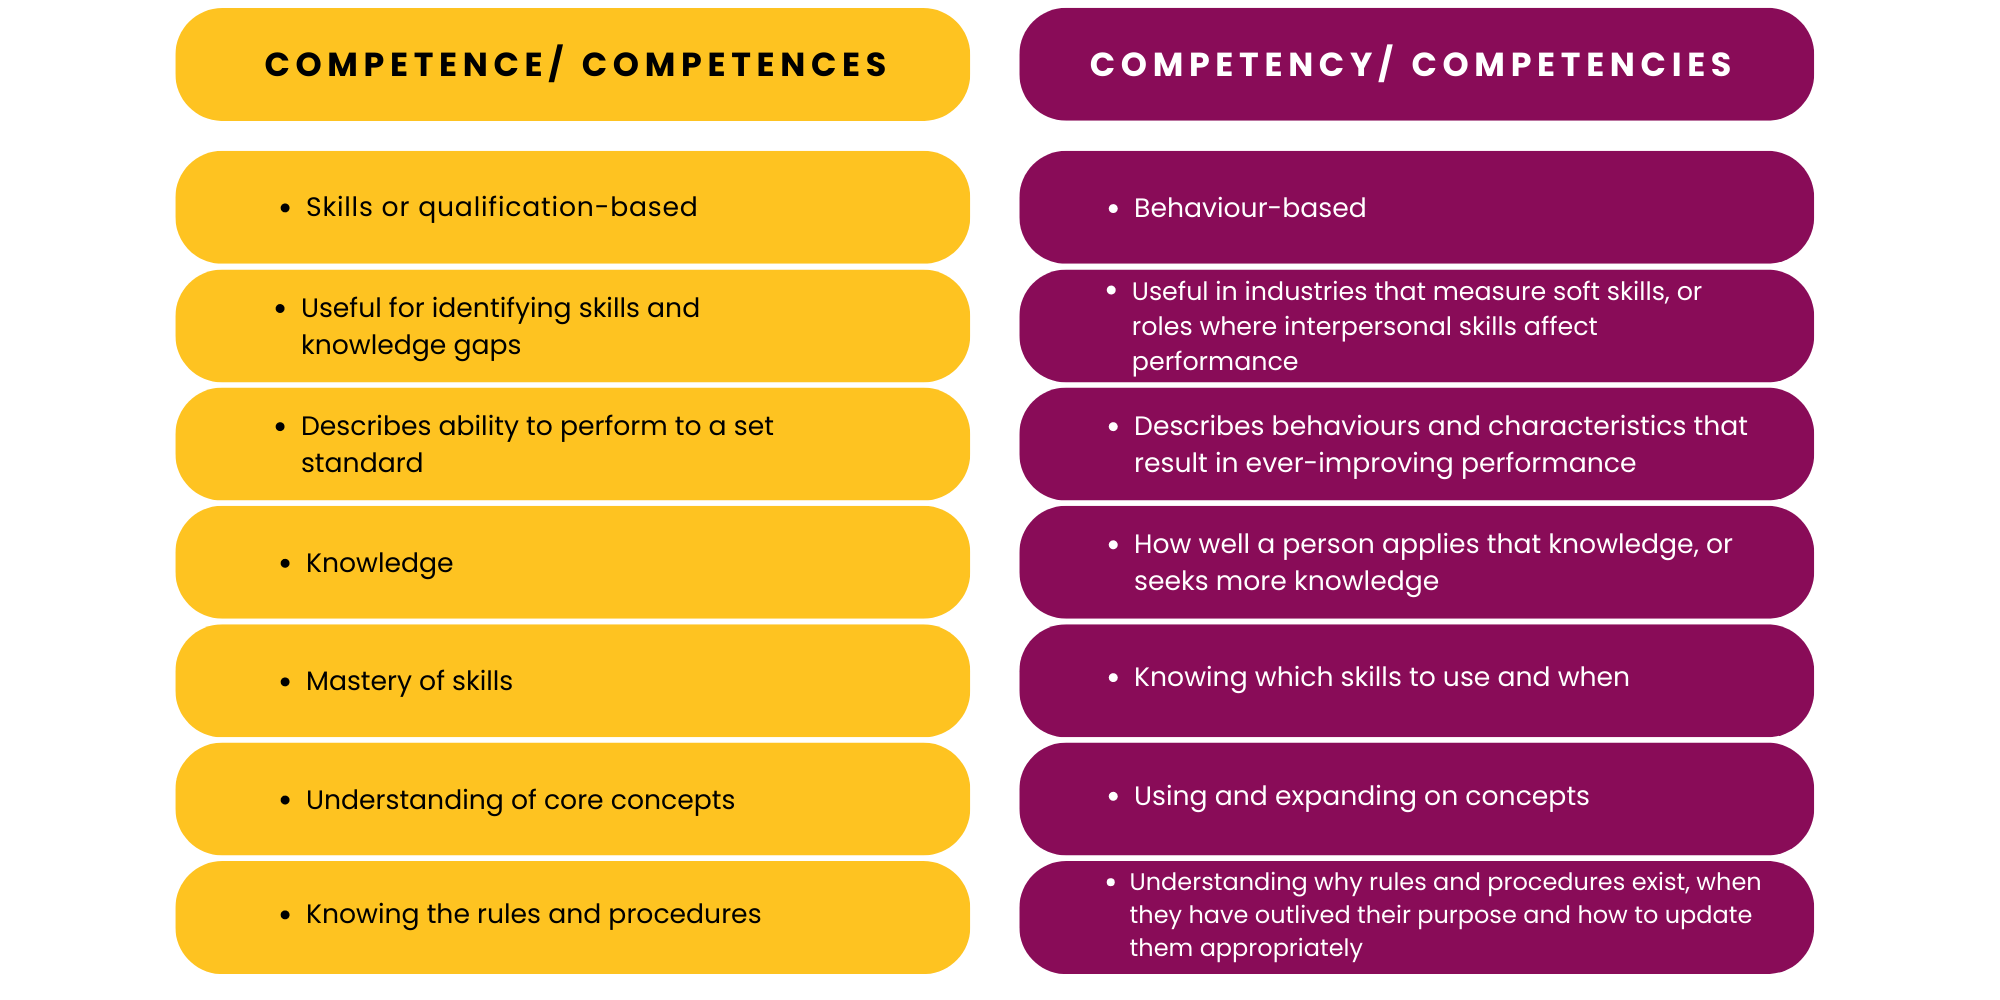 Competence vs Competency